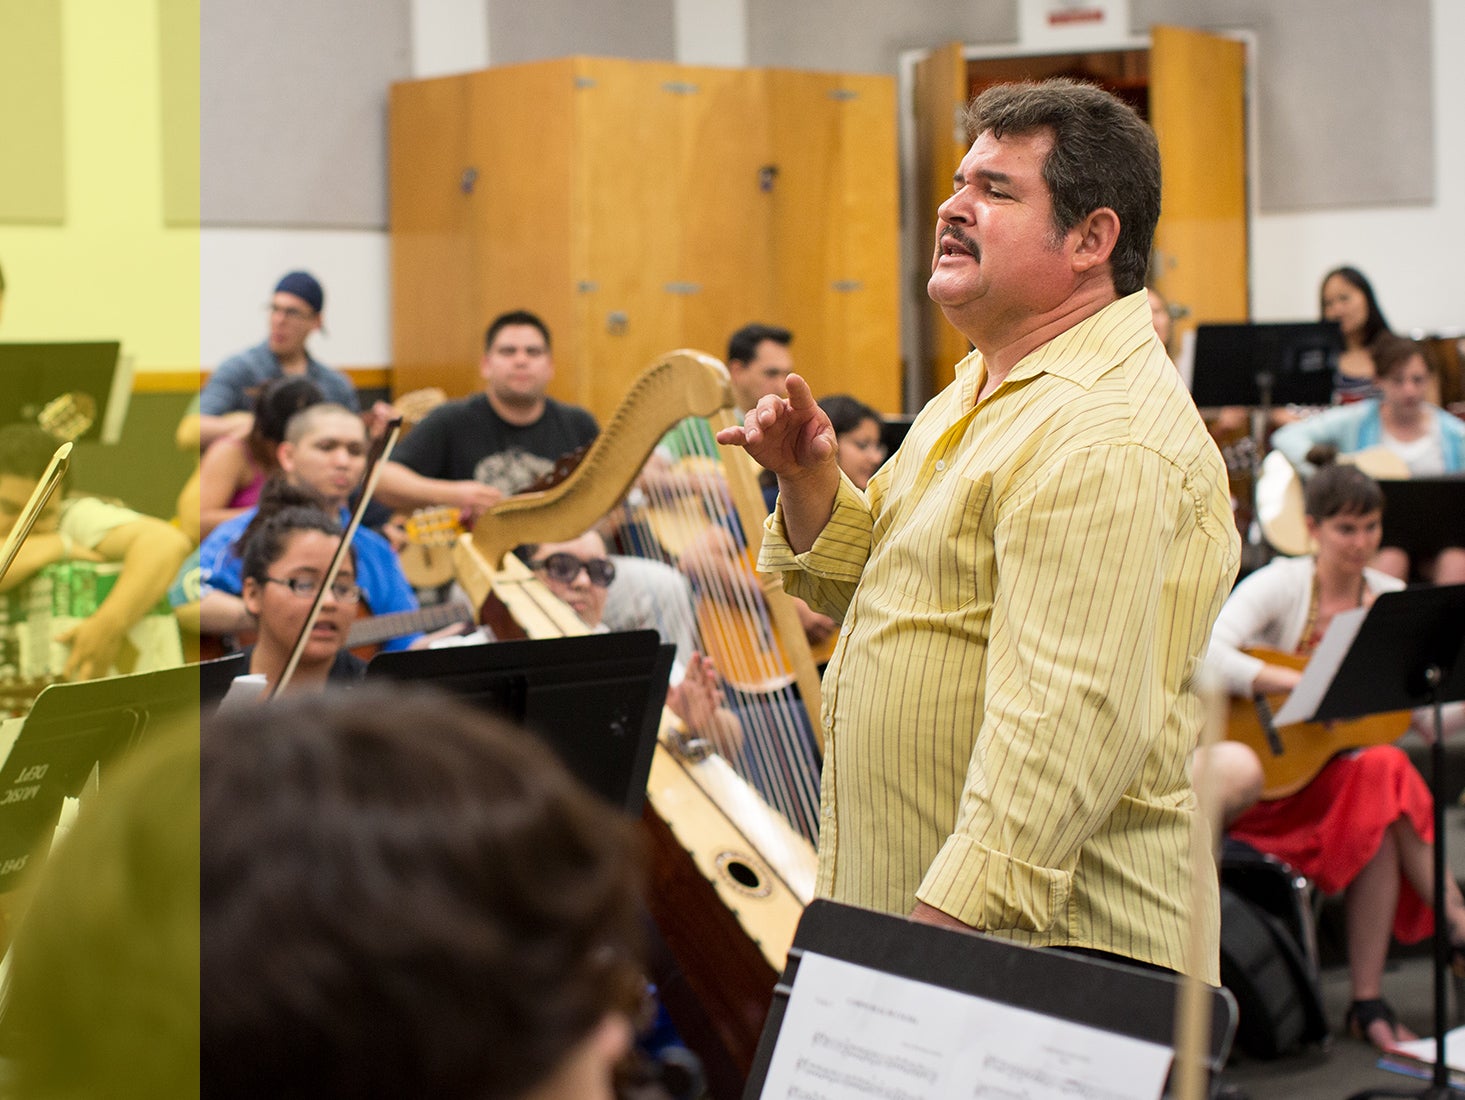 Arranger, director, instructor and musician Jesús Guzmán leads students in an orchestra.